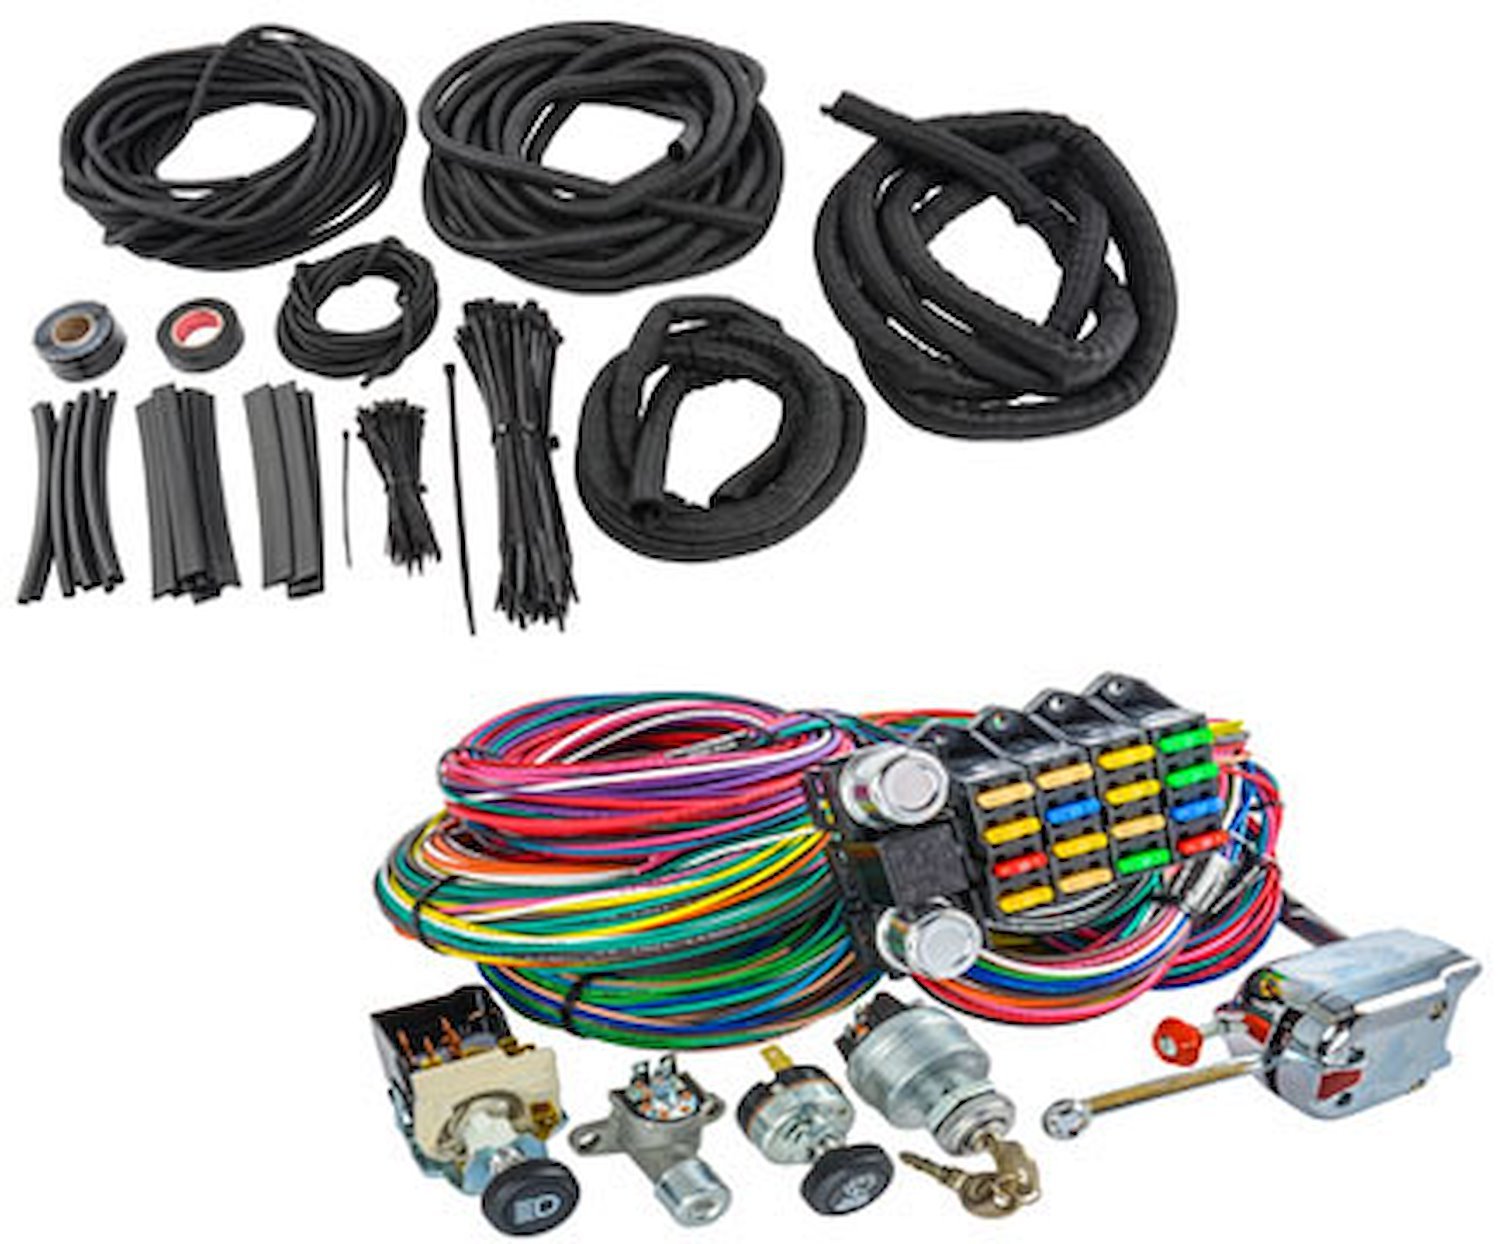 Universal Wiring Harness & Switch Kit with Woven Braid Chassis Kit